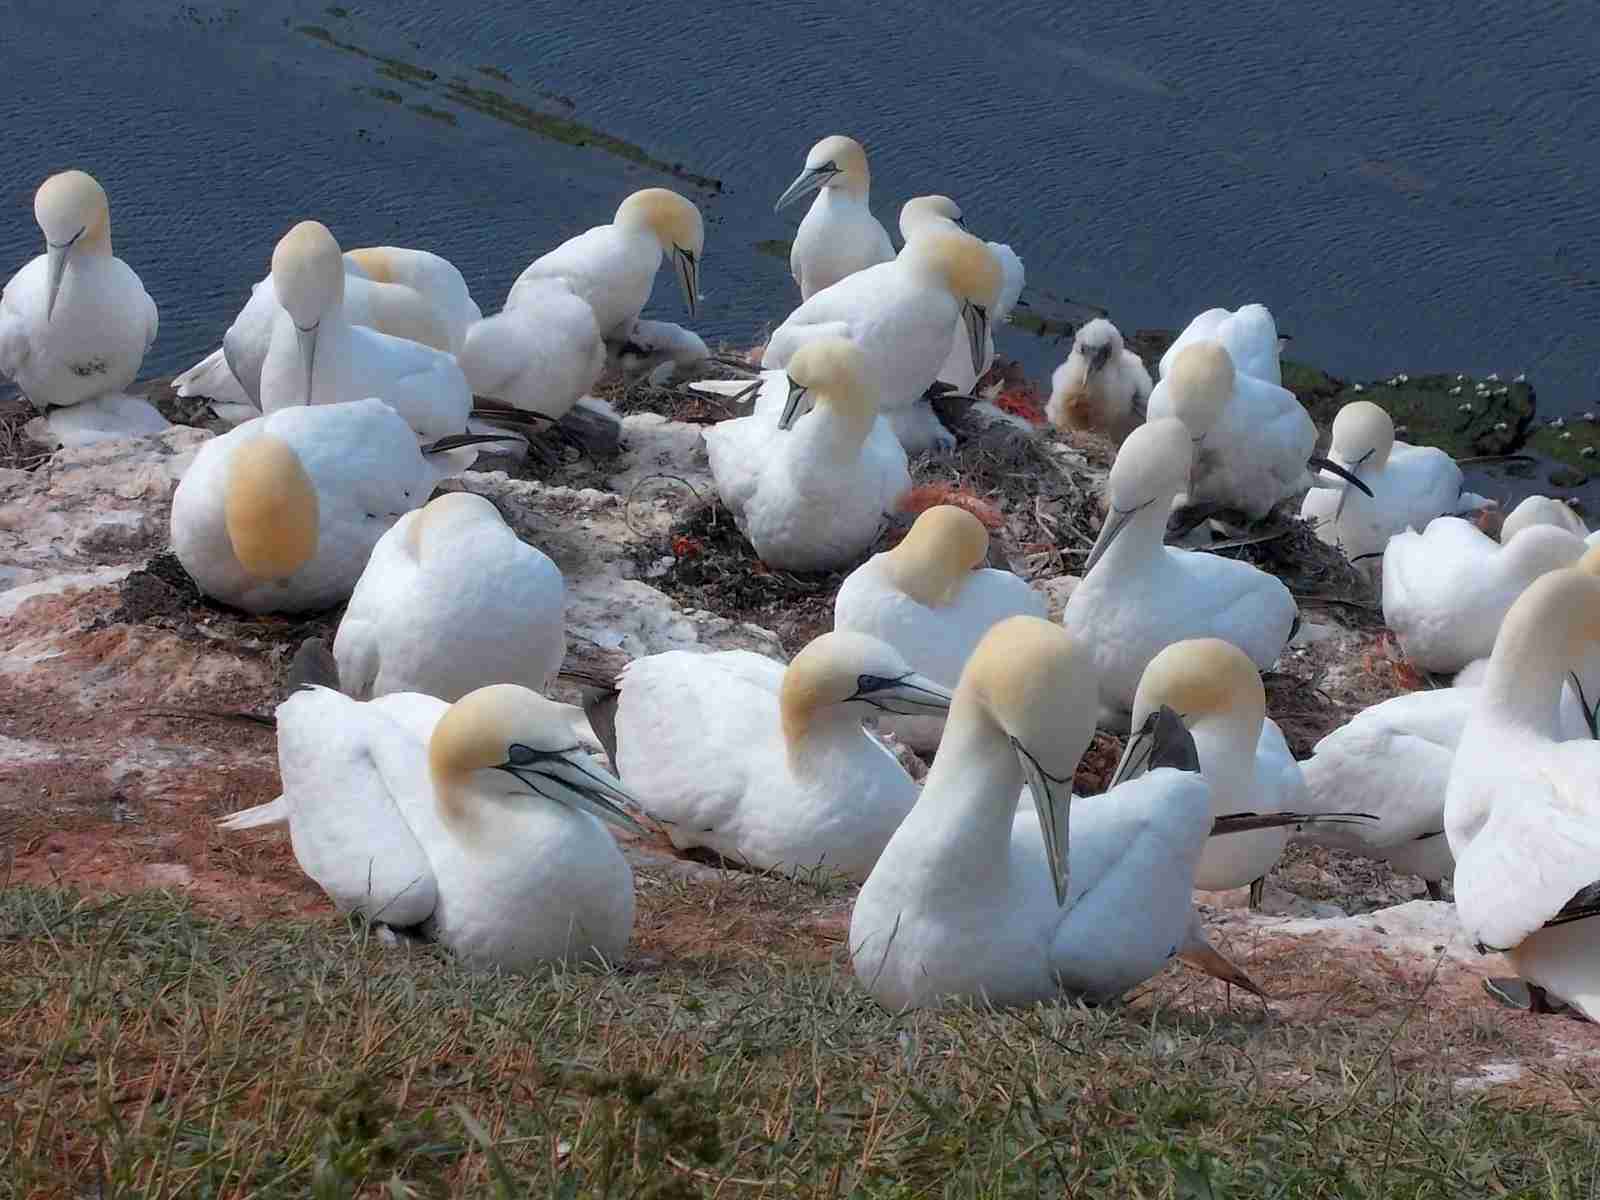 Gannets on Heligoland - Can you spot the chick?